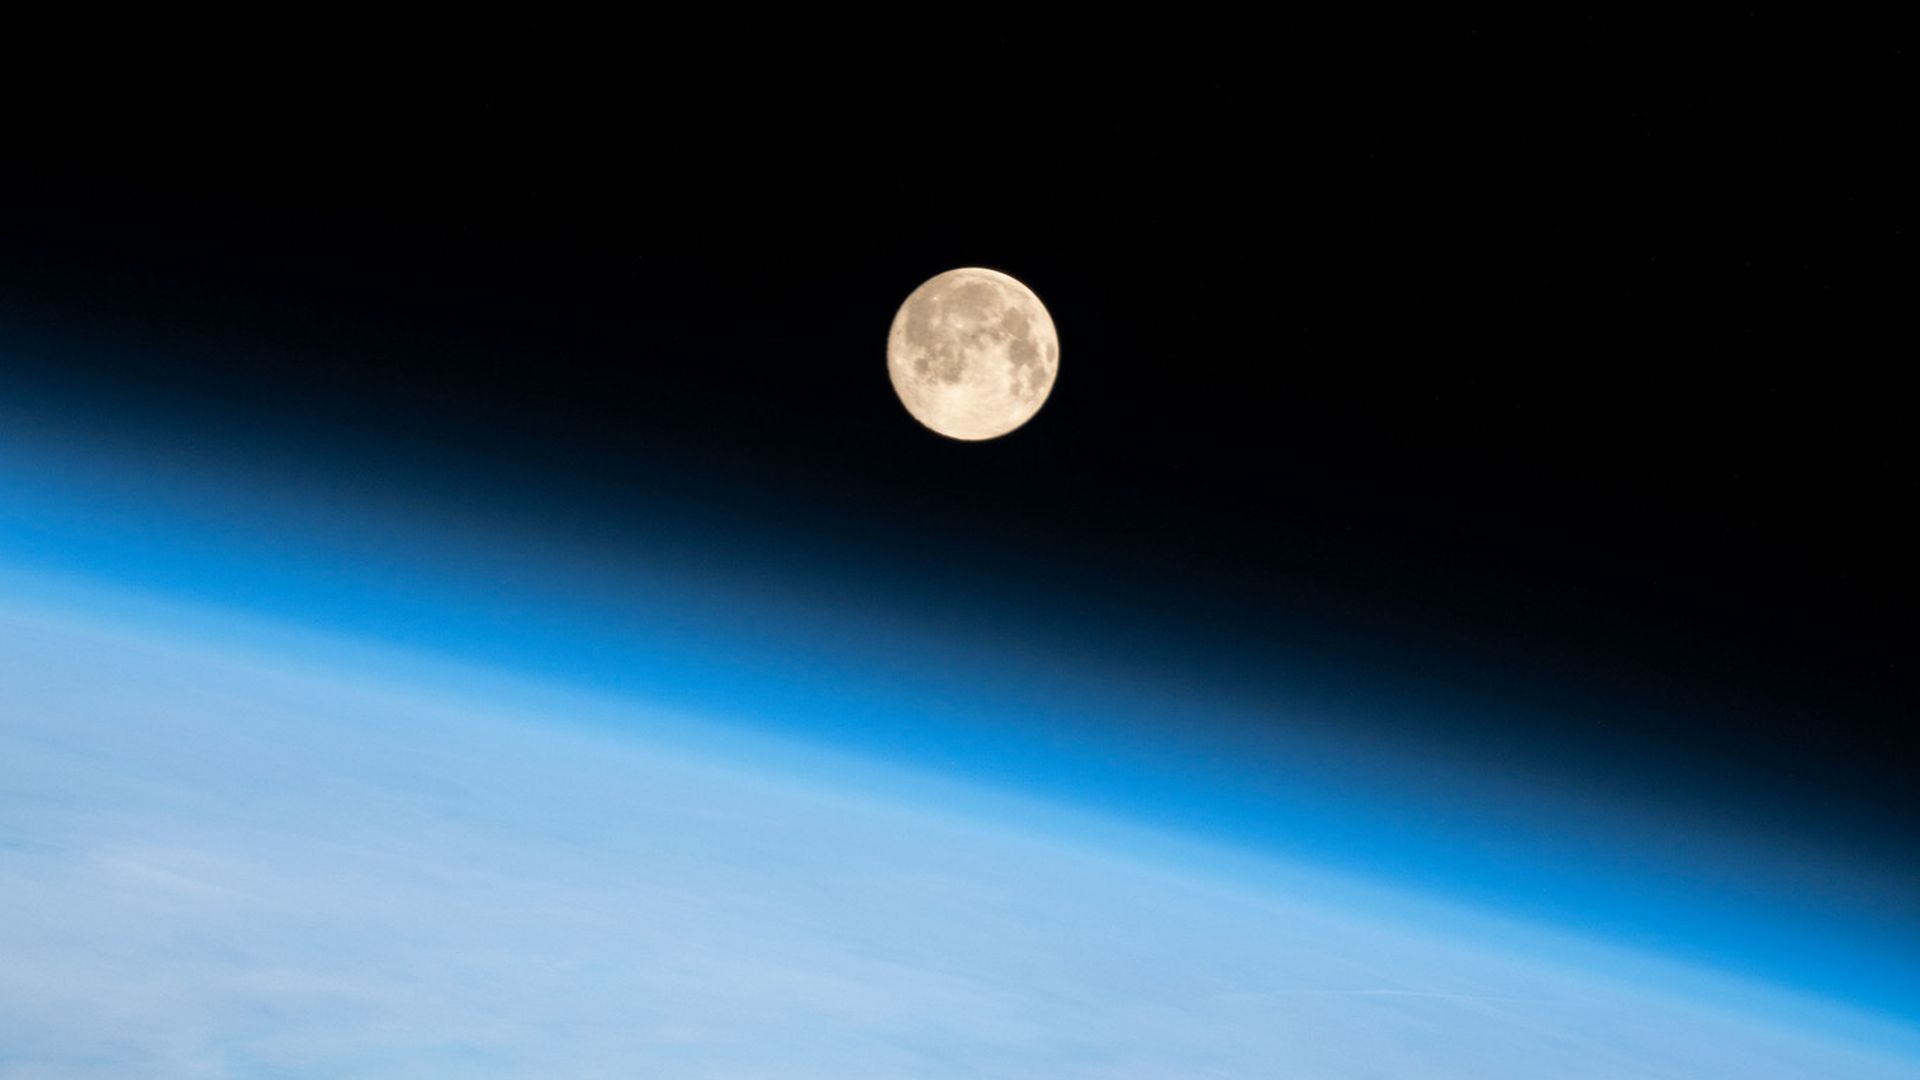 The Moon hovering above the blue limb of the Earth